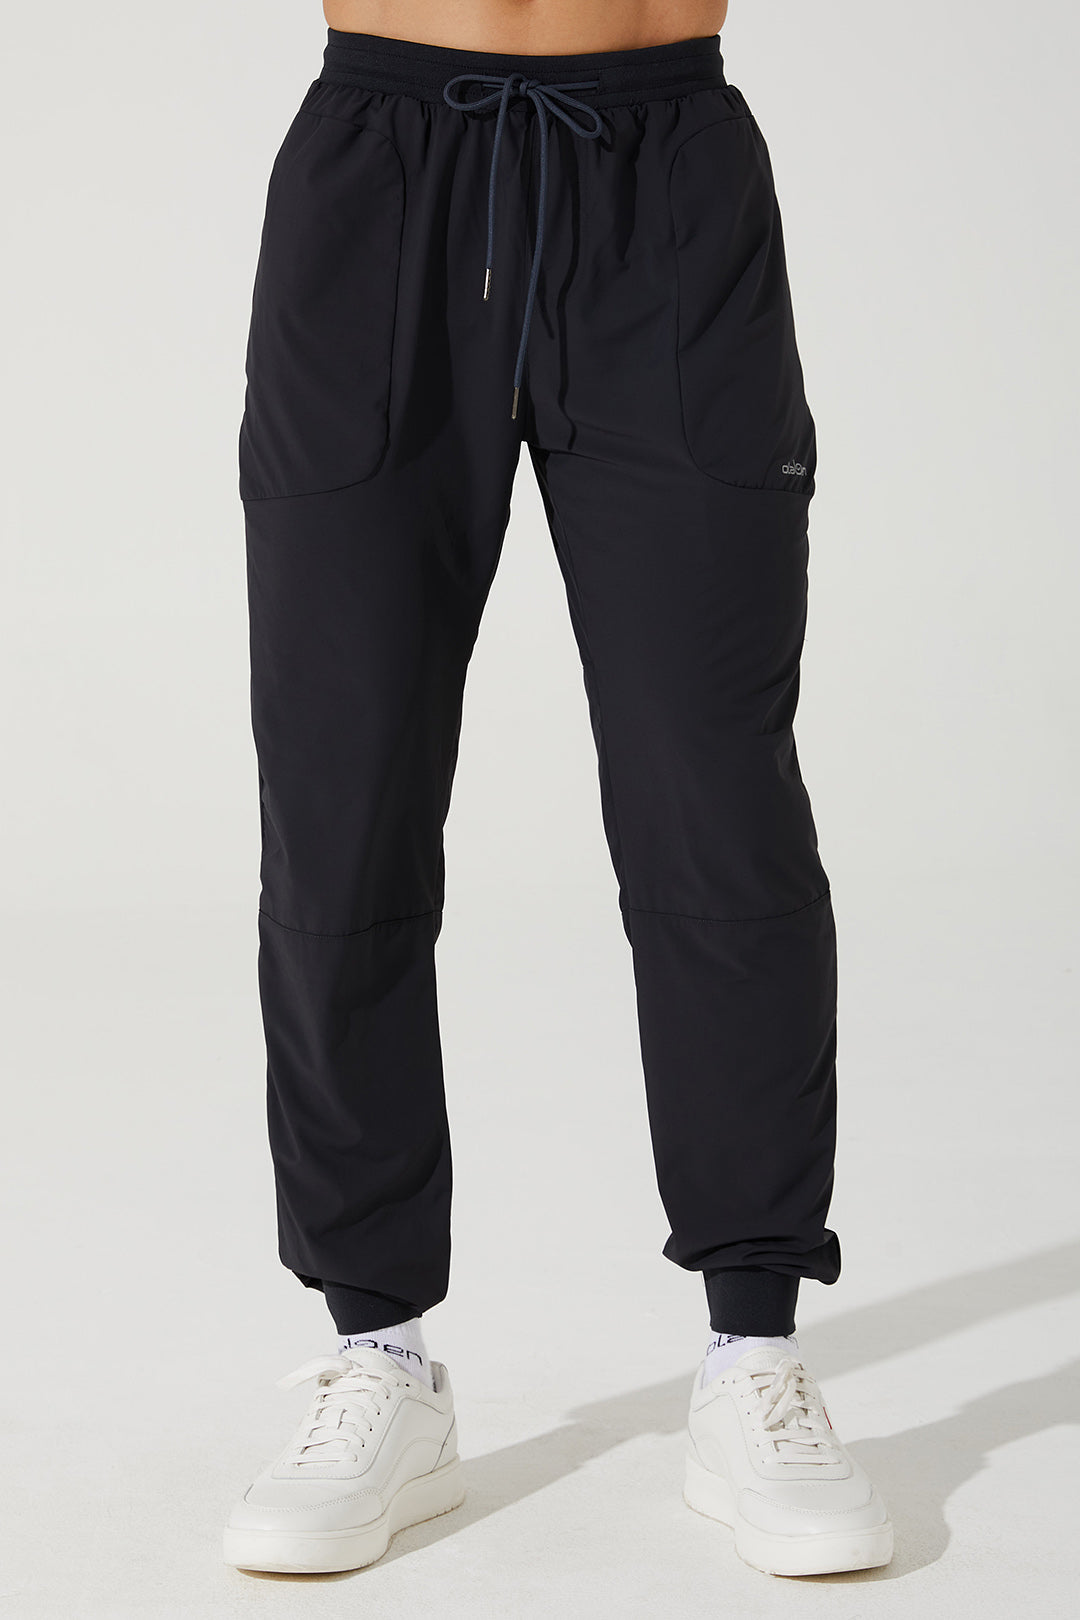 Black men's trousers by Travis Pant, style OW-0029-MTR-BK, in a single image.